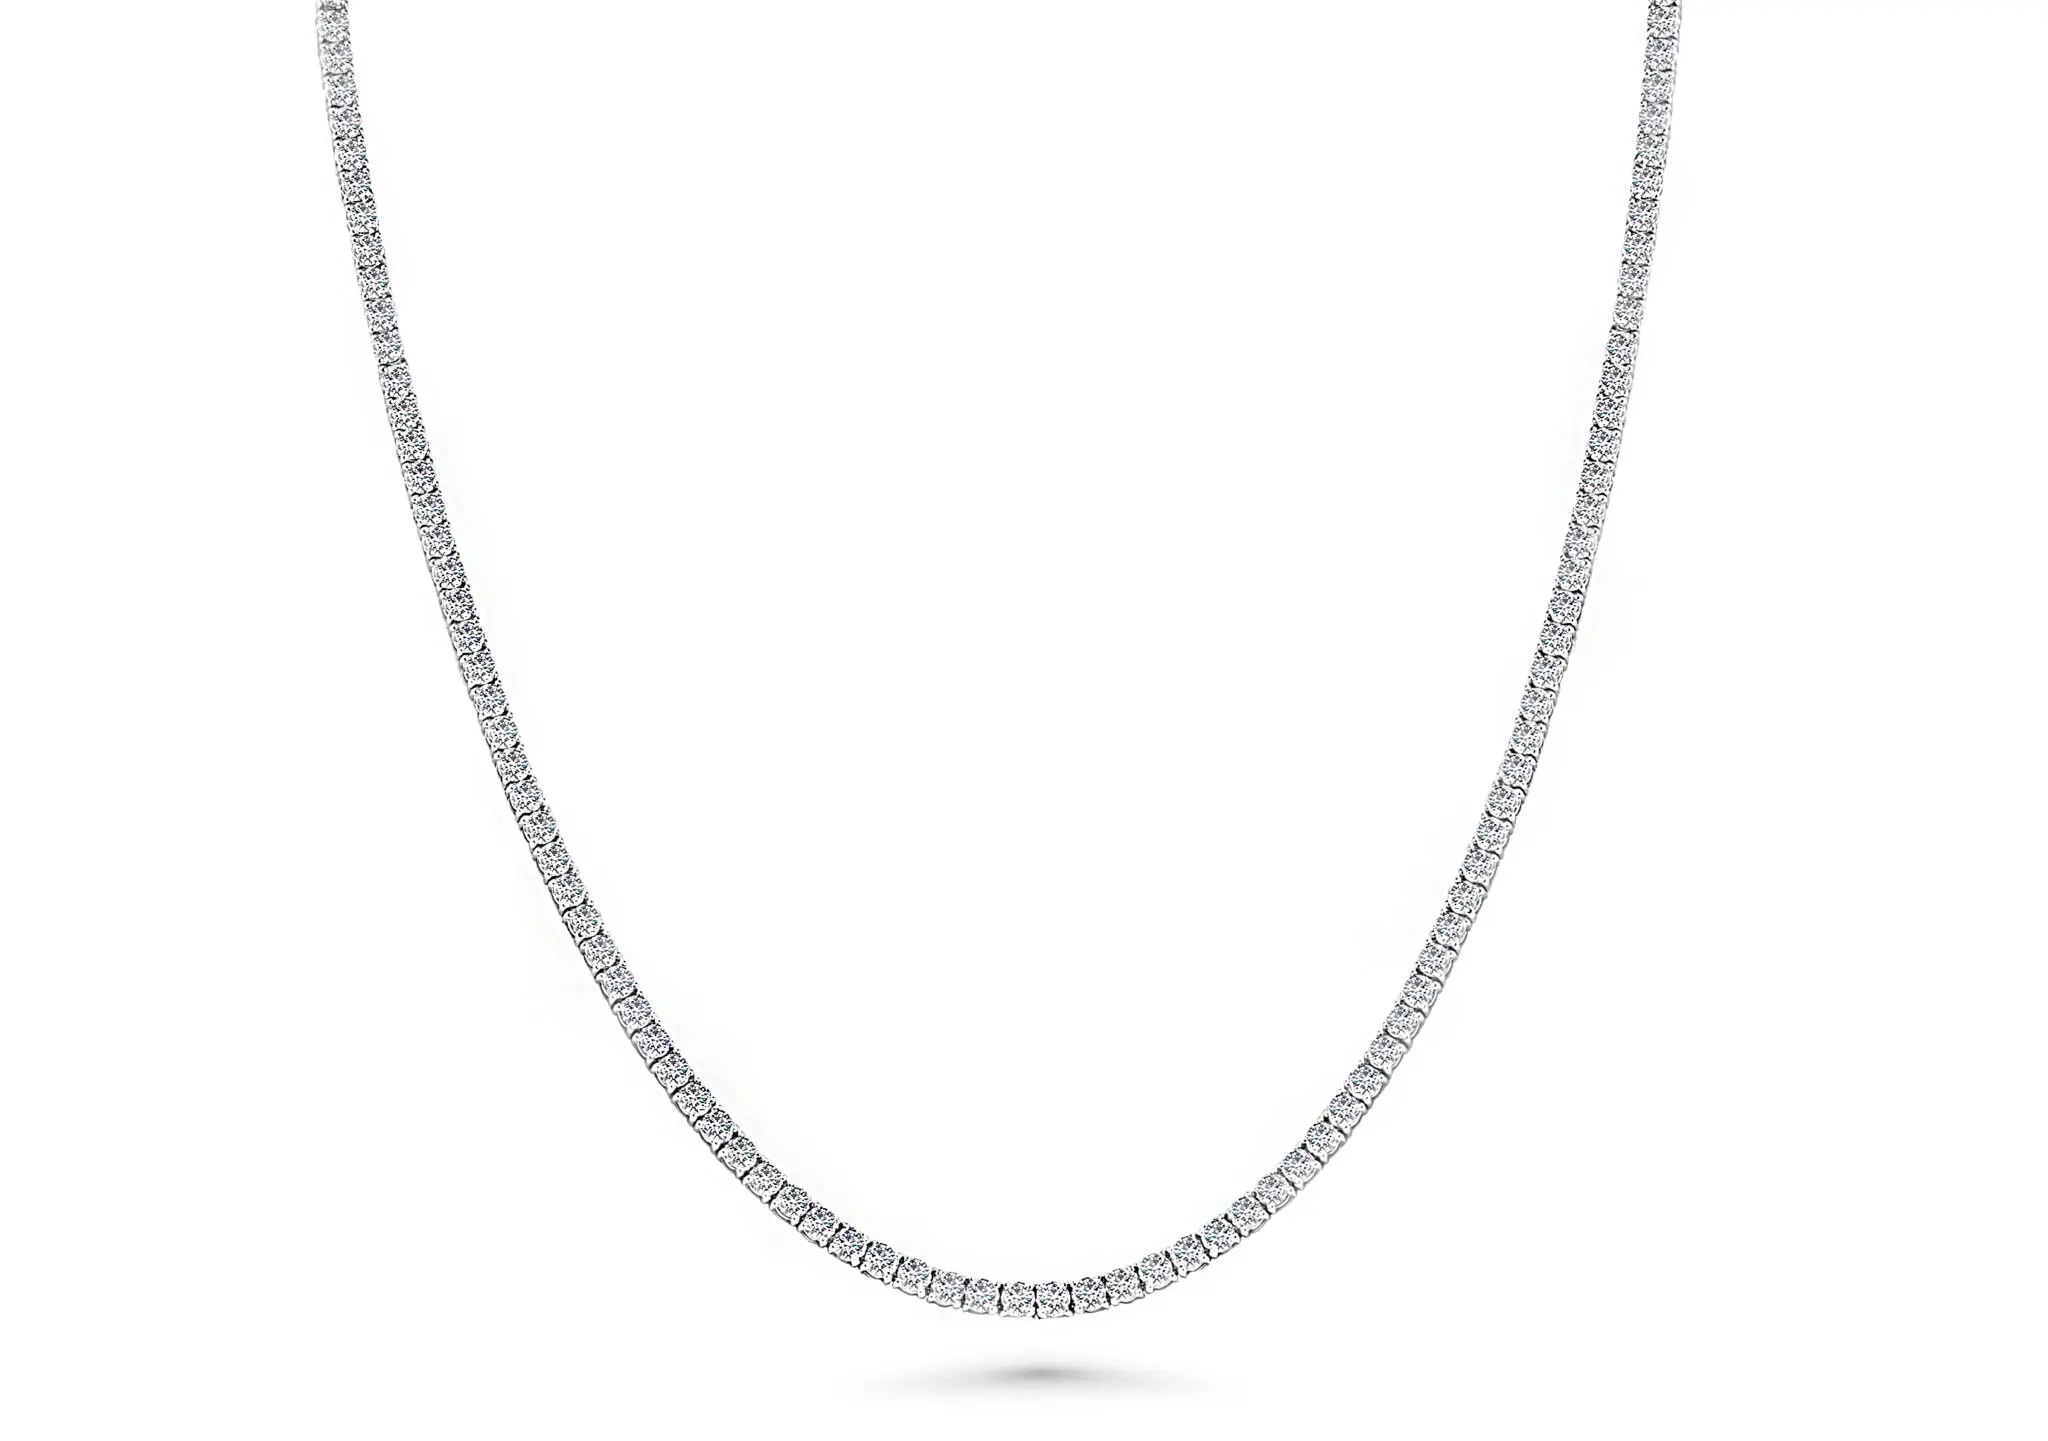 Diamonds By The Inch, Diamond Necklaces - HH Gold, Inc.